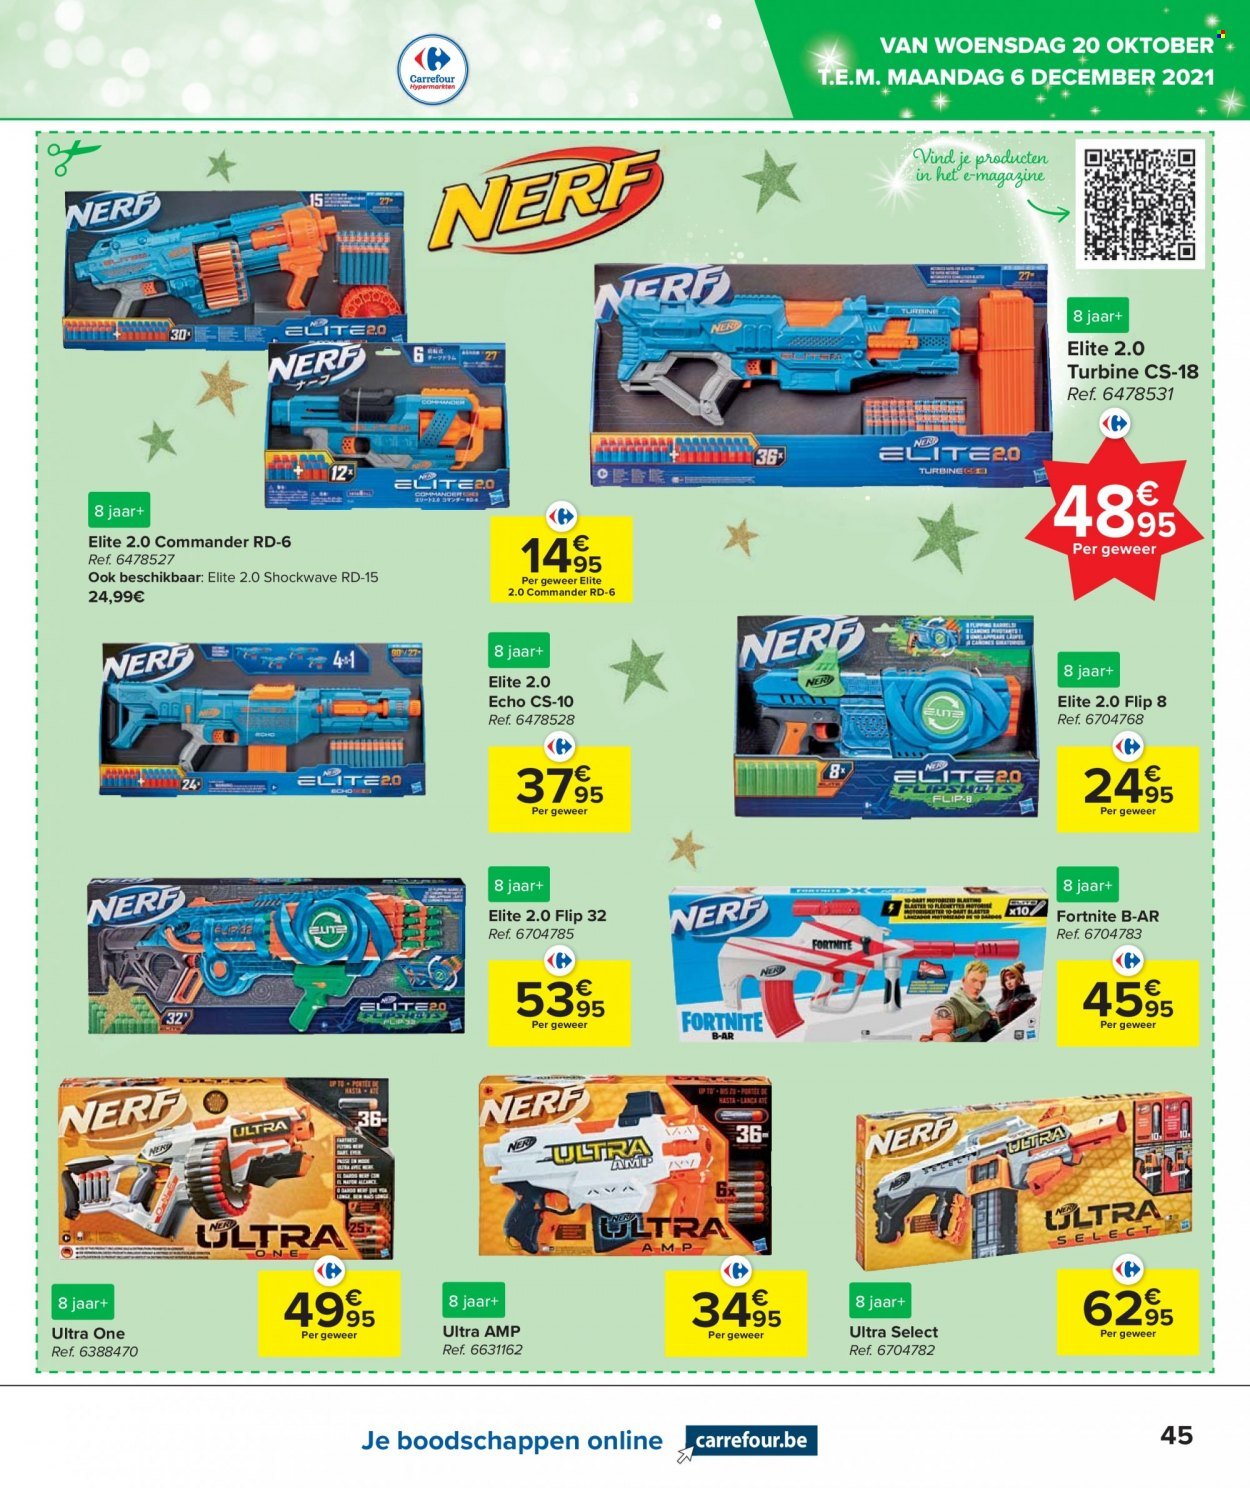 Catalogue Carrefour hypermarkt - 20.10.2021 - 6.12.2021. Page 45.